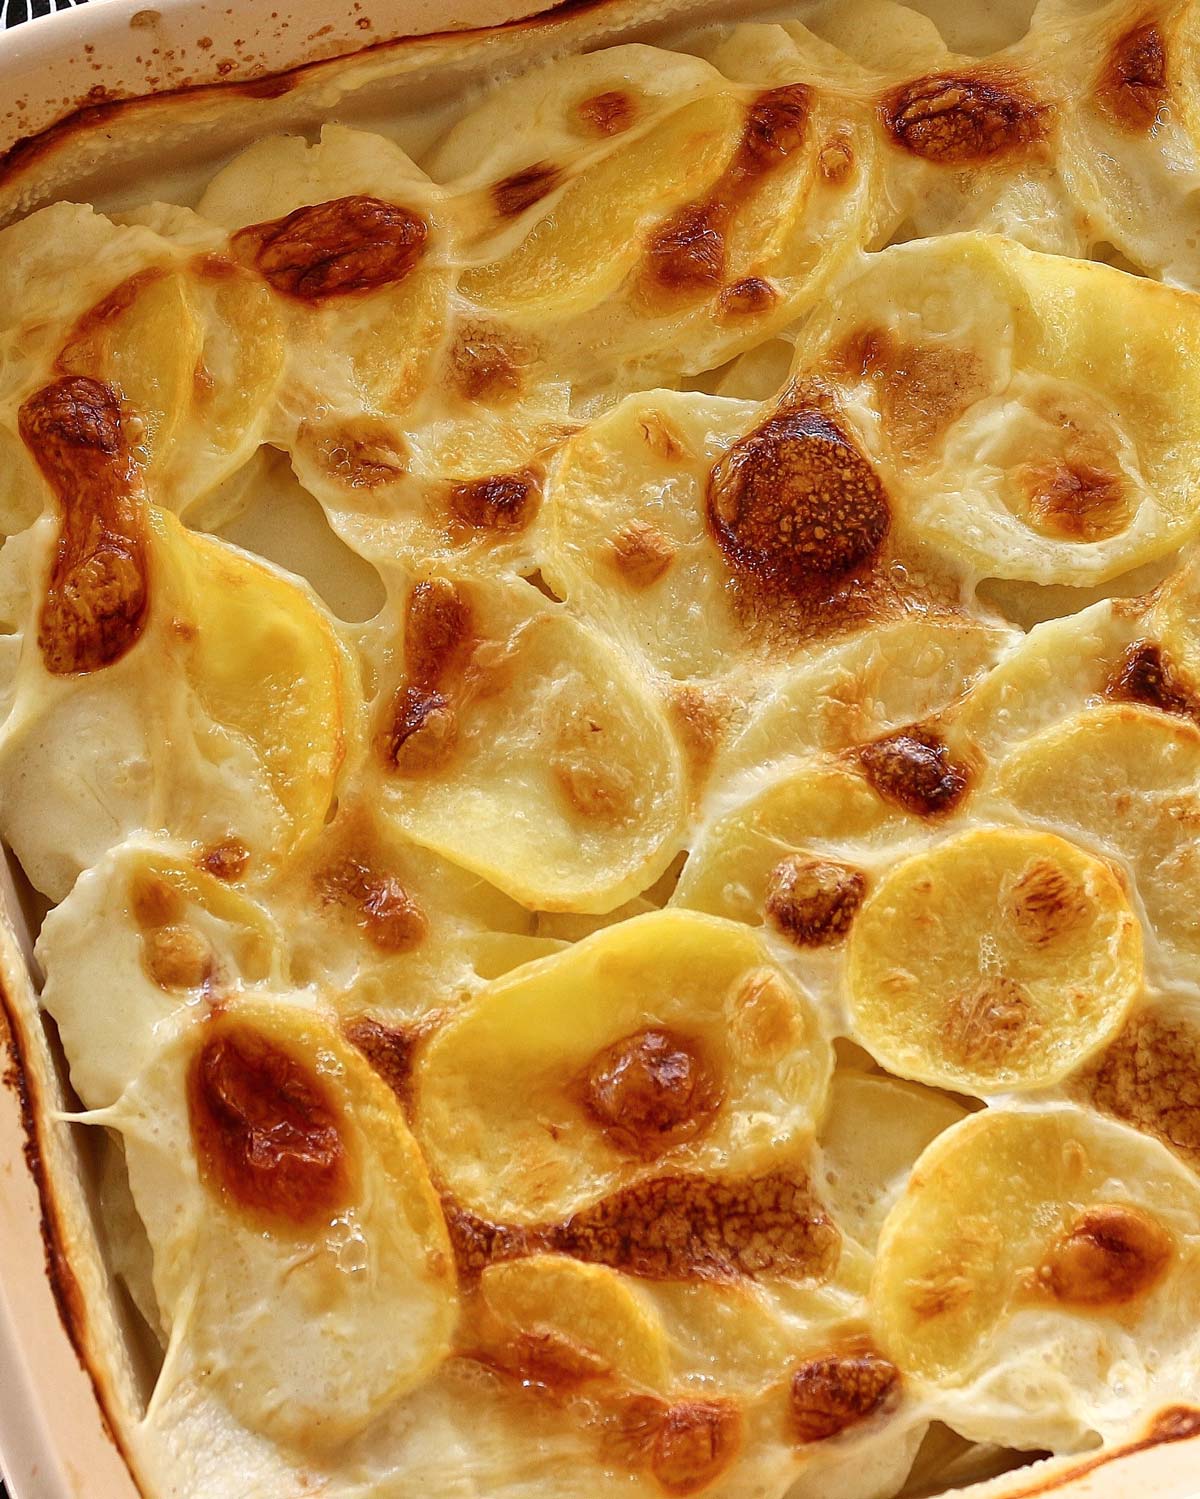 Closeup of French potato gratin dauphinois with bubbly browned top in a casserole dish.